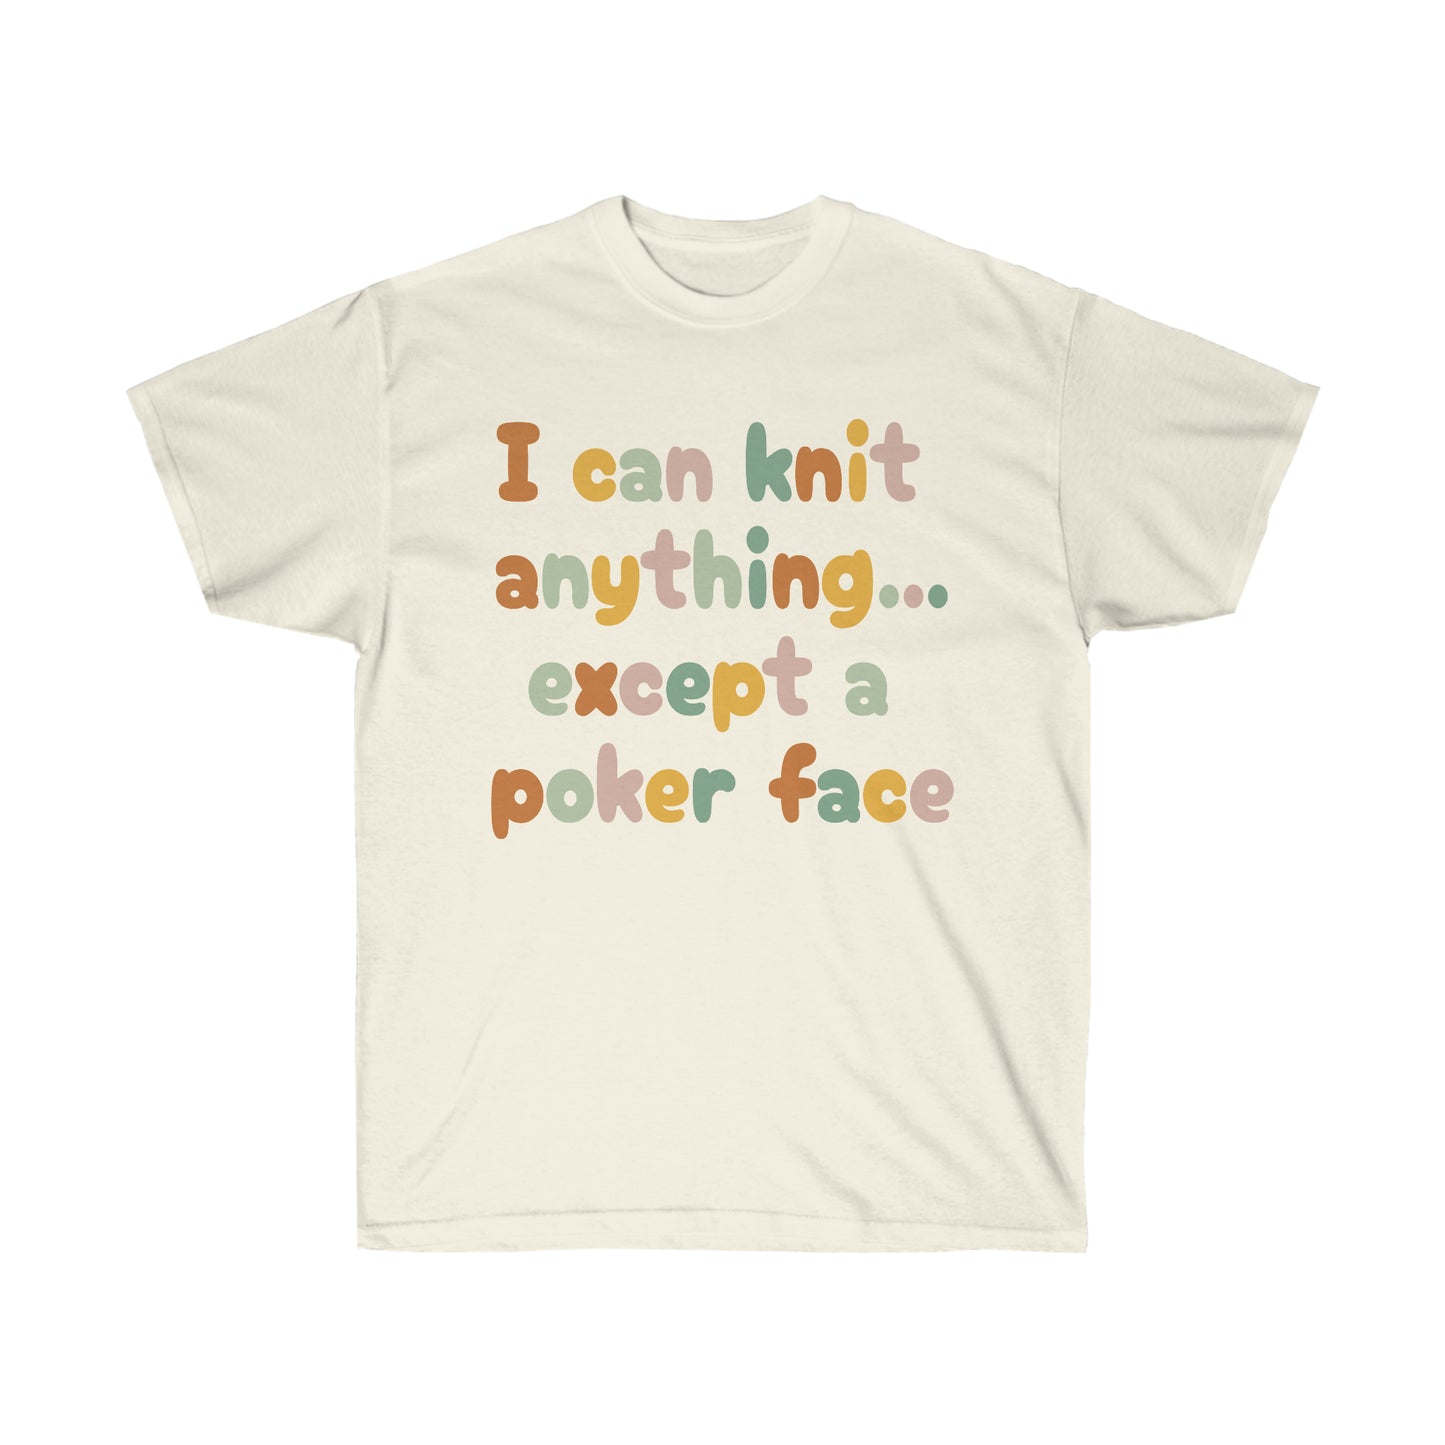 I can knit anything...except a poker face T Shirt